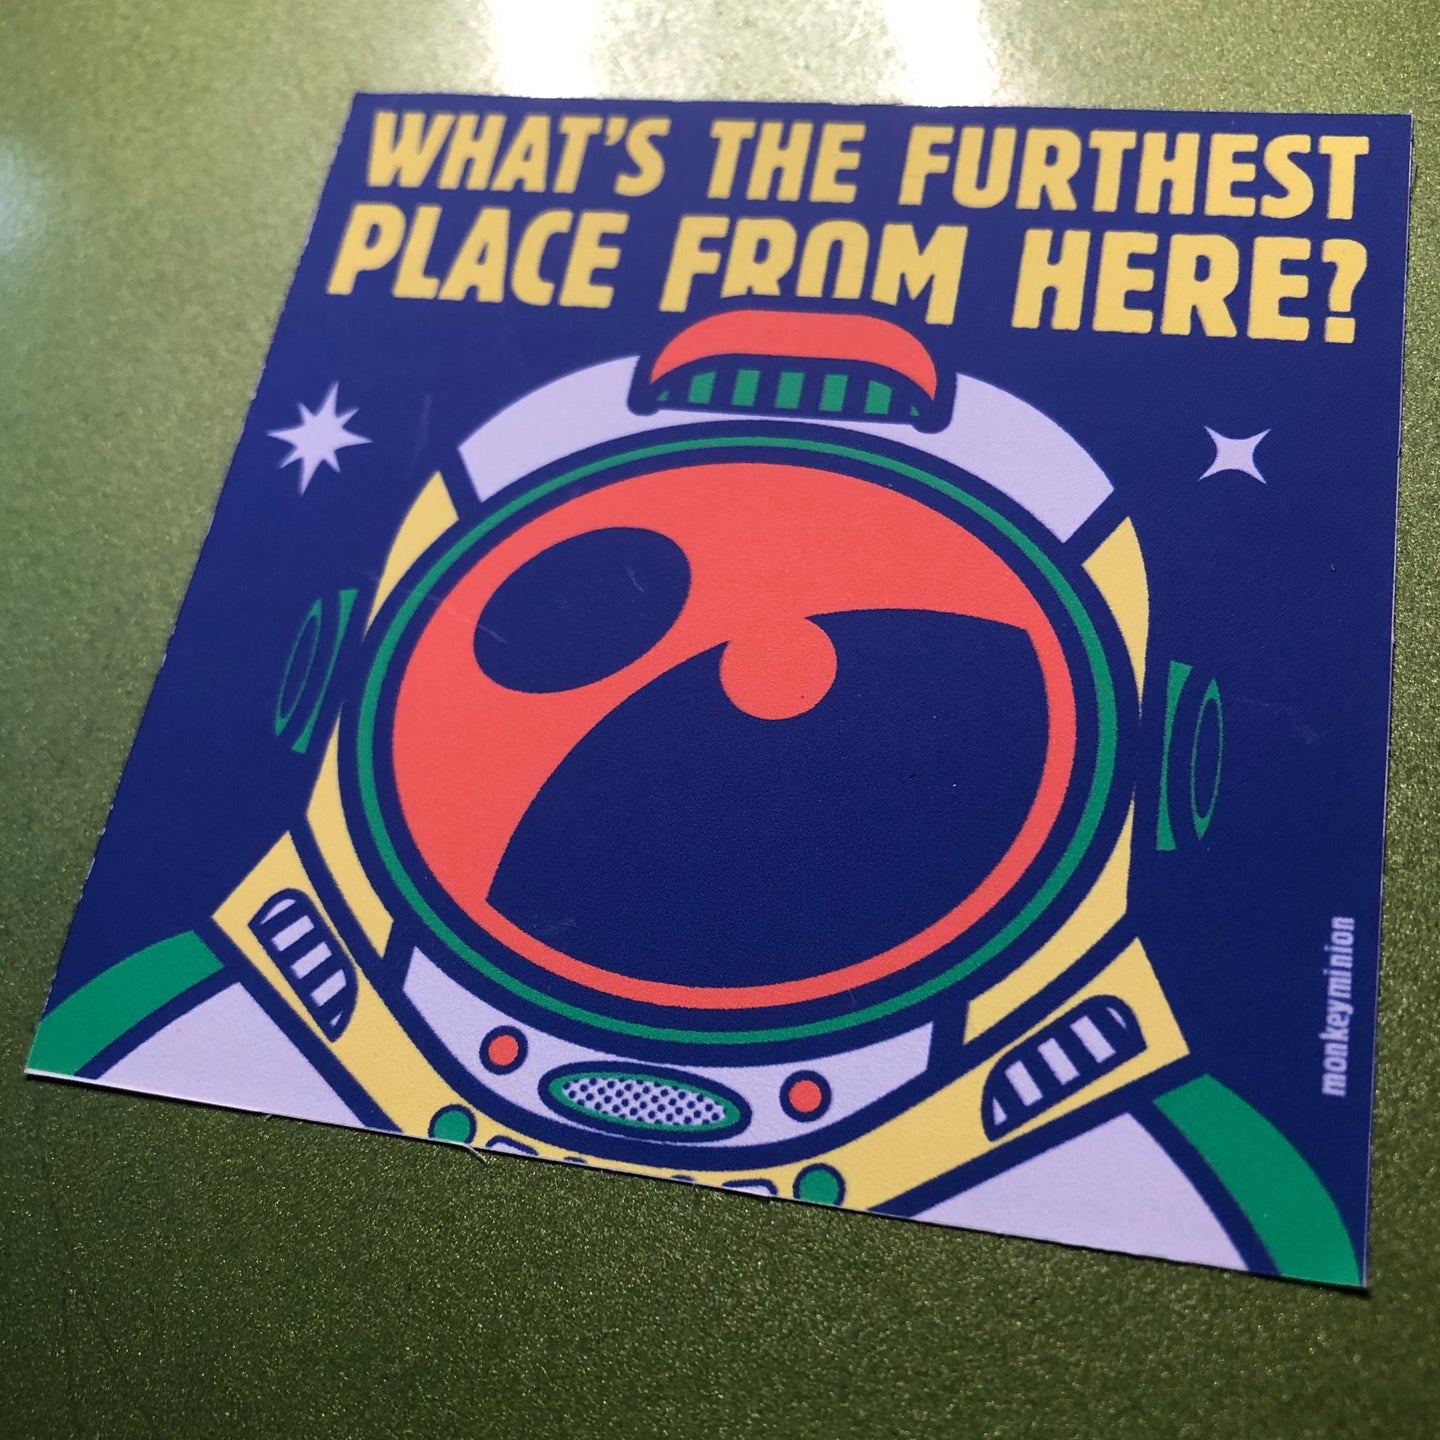 What's the Furthest Place From Here? - Vinyl Sticker